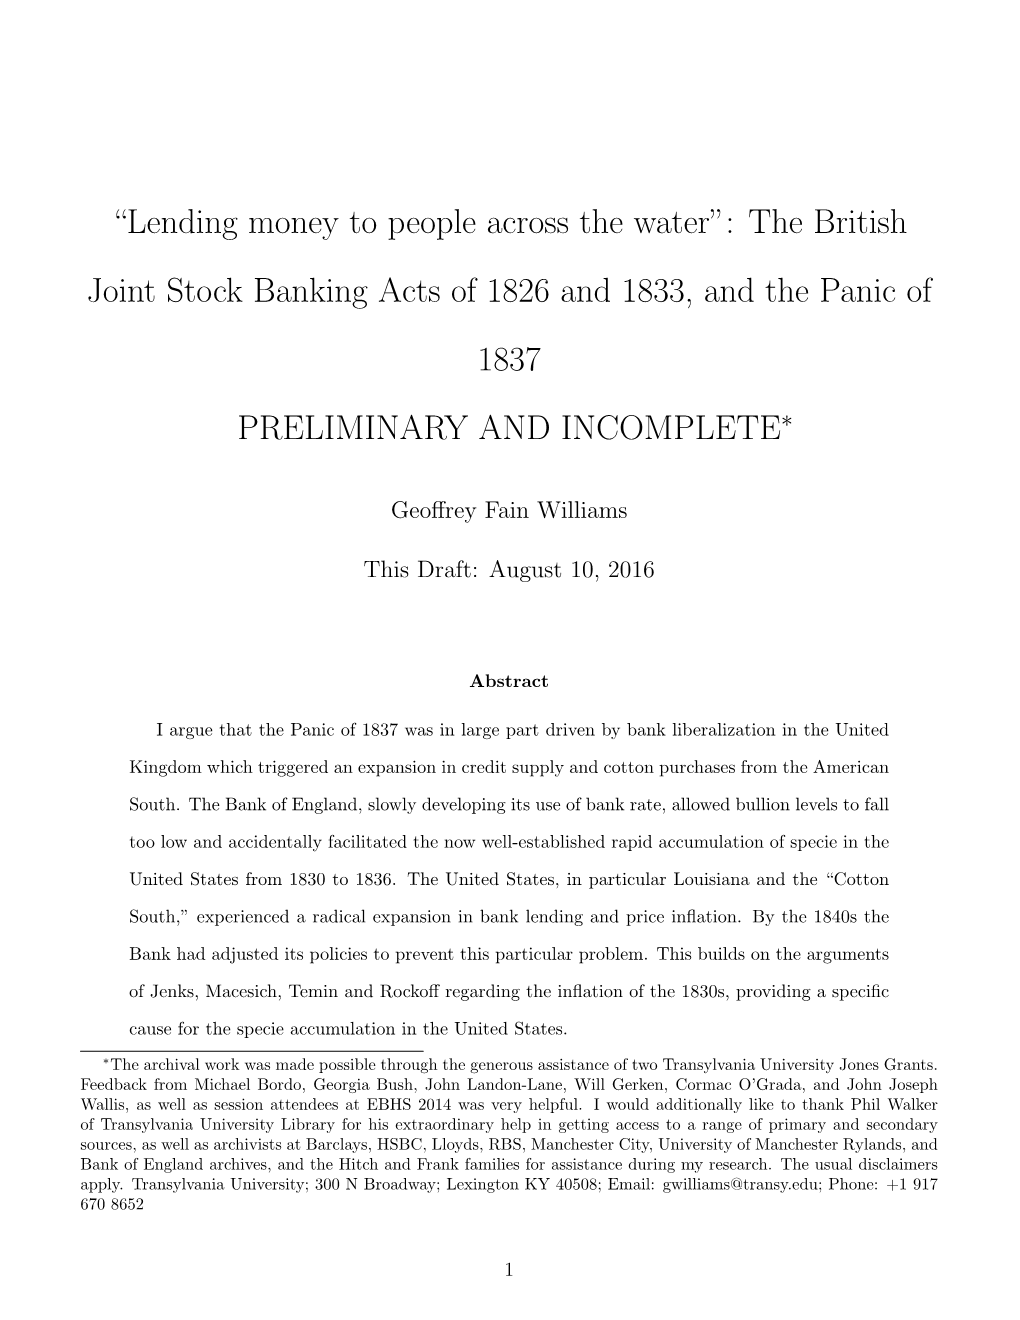 “Lending Money to People Across the Water”: the British Joint Stock Banking Acts of 1826 and 1833, and the Panic of 1837 PRELIMINARY and INCOMPLETE∗